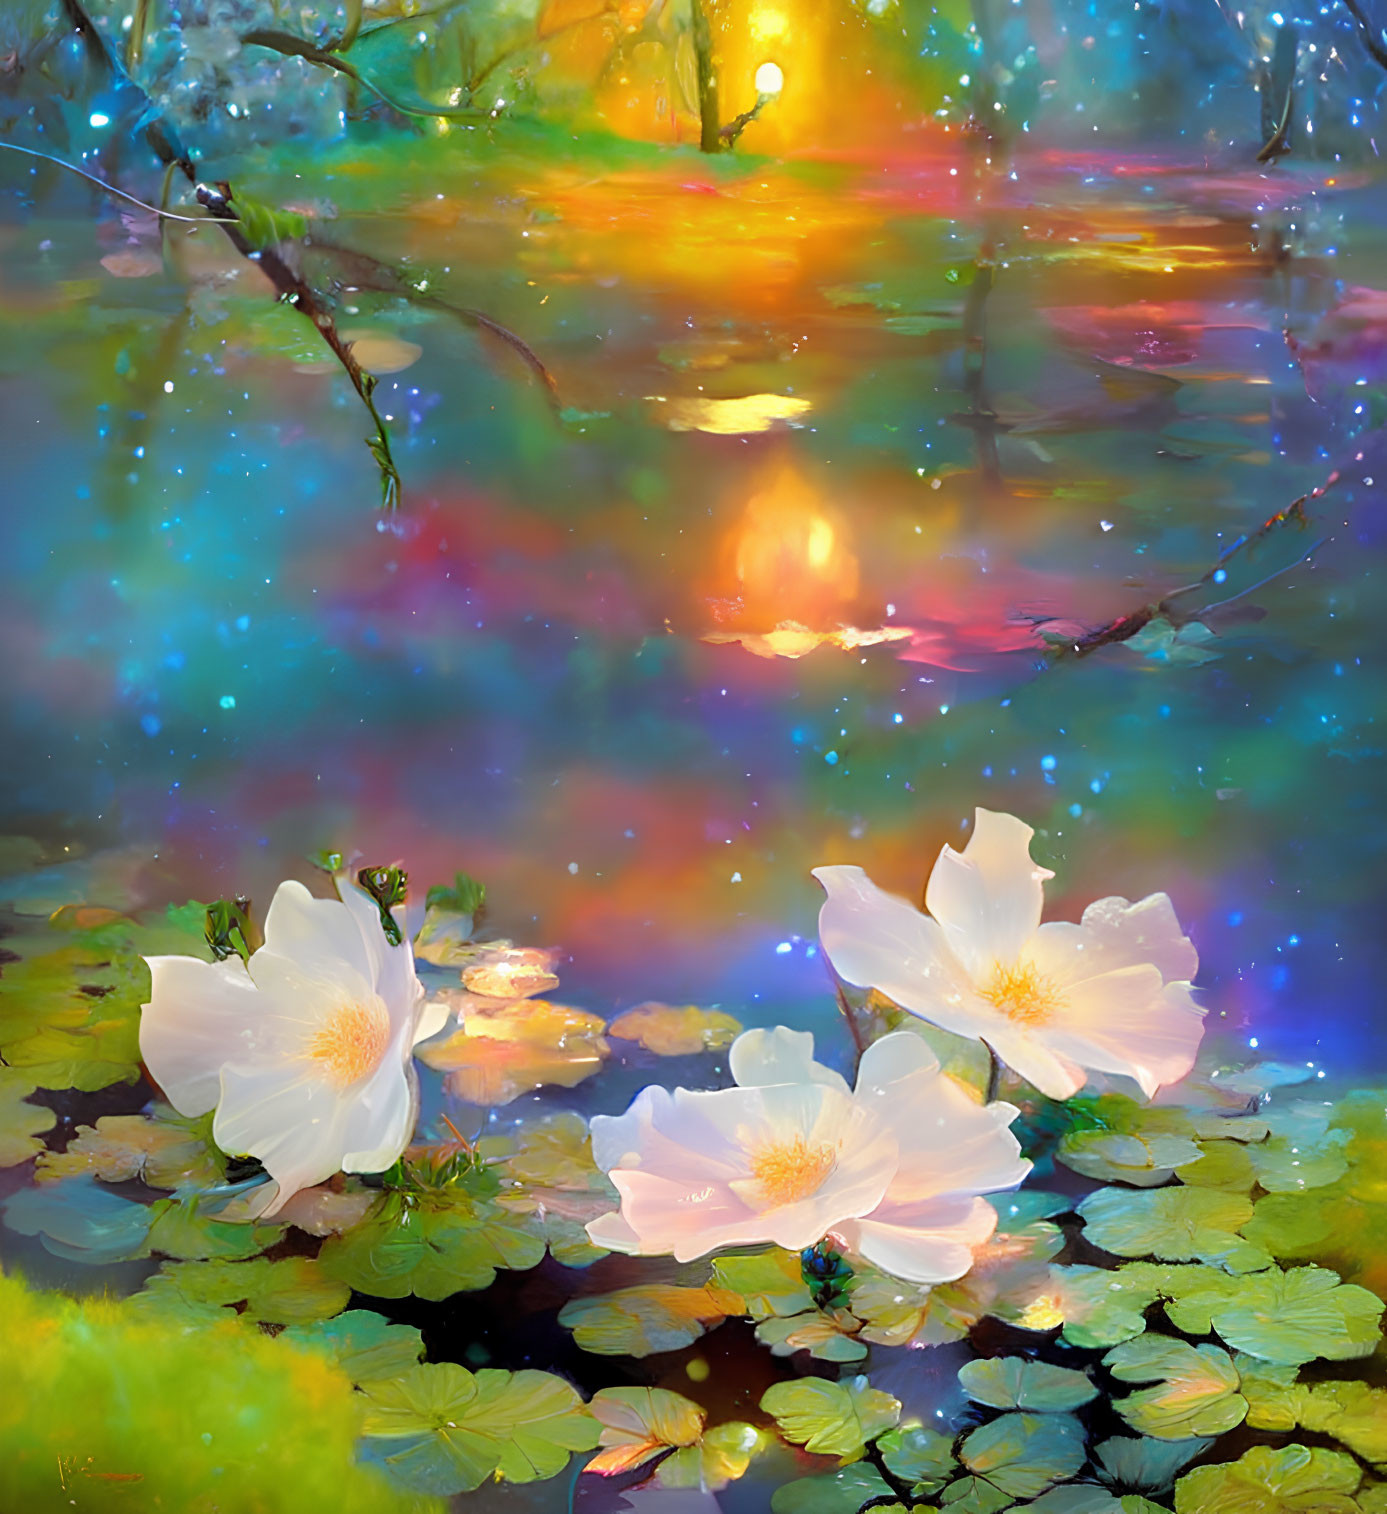 Colorful surreal scene: white flowers, lily pads, reflective water, sunset glow.